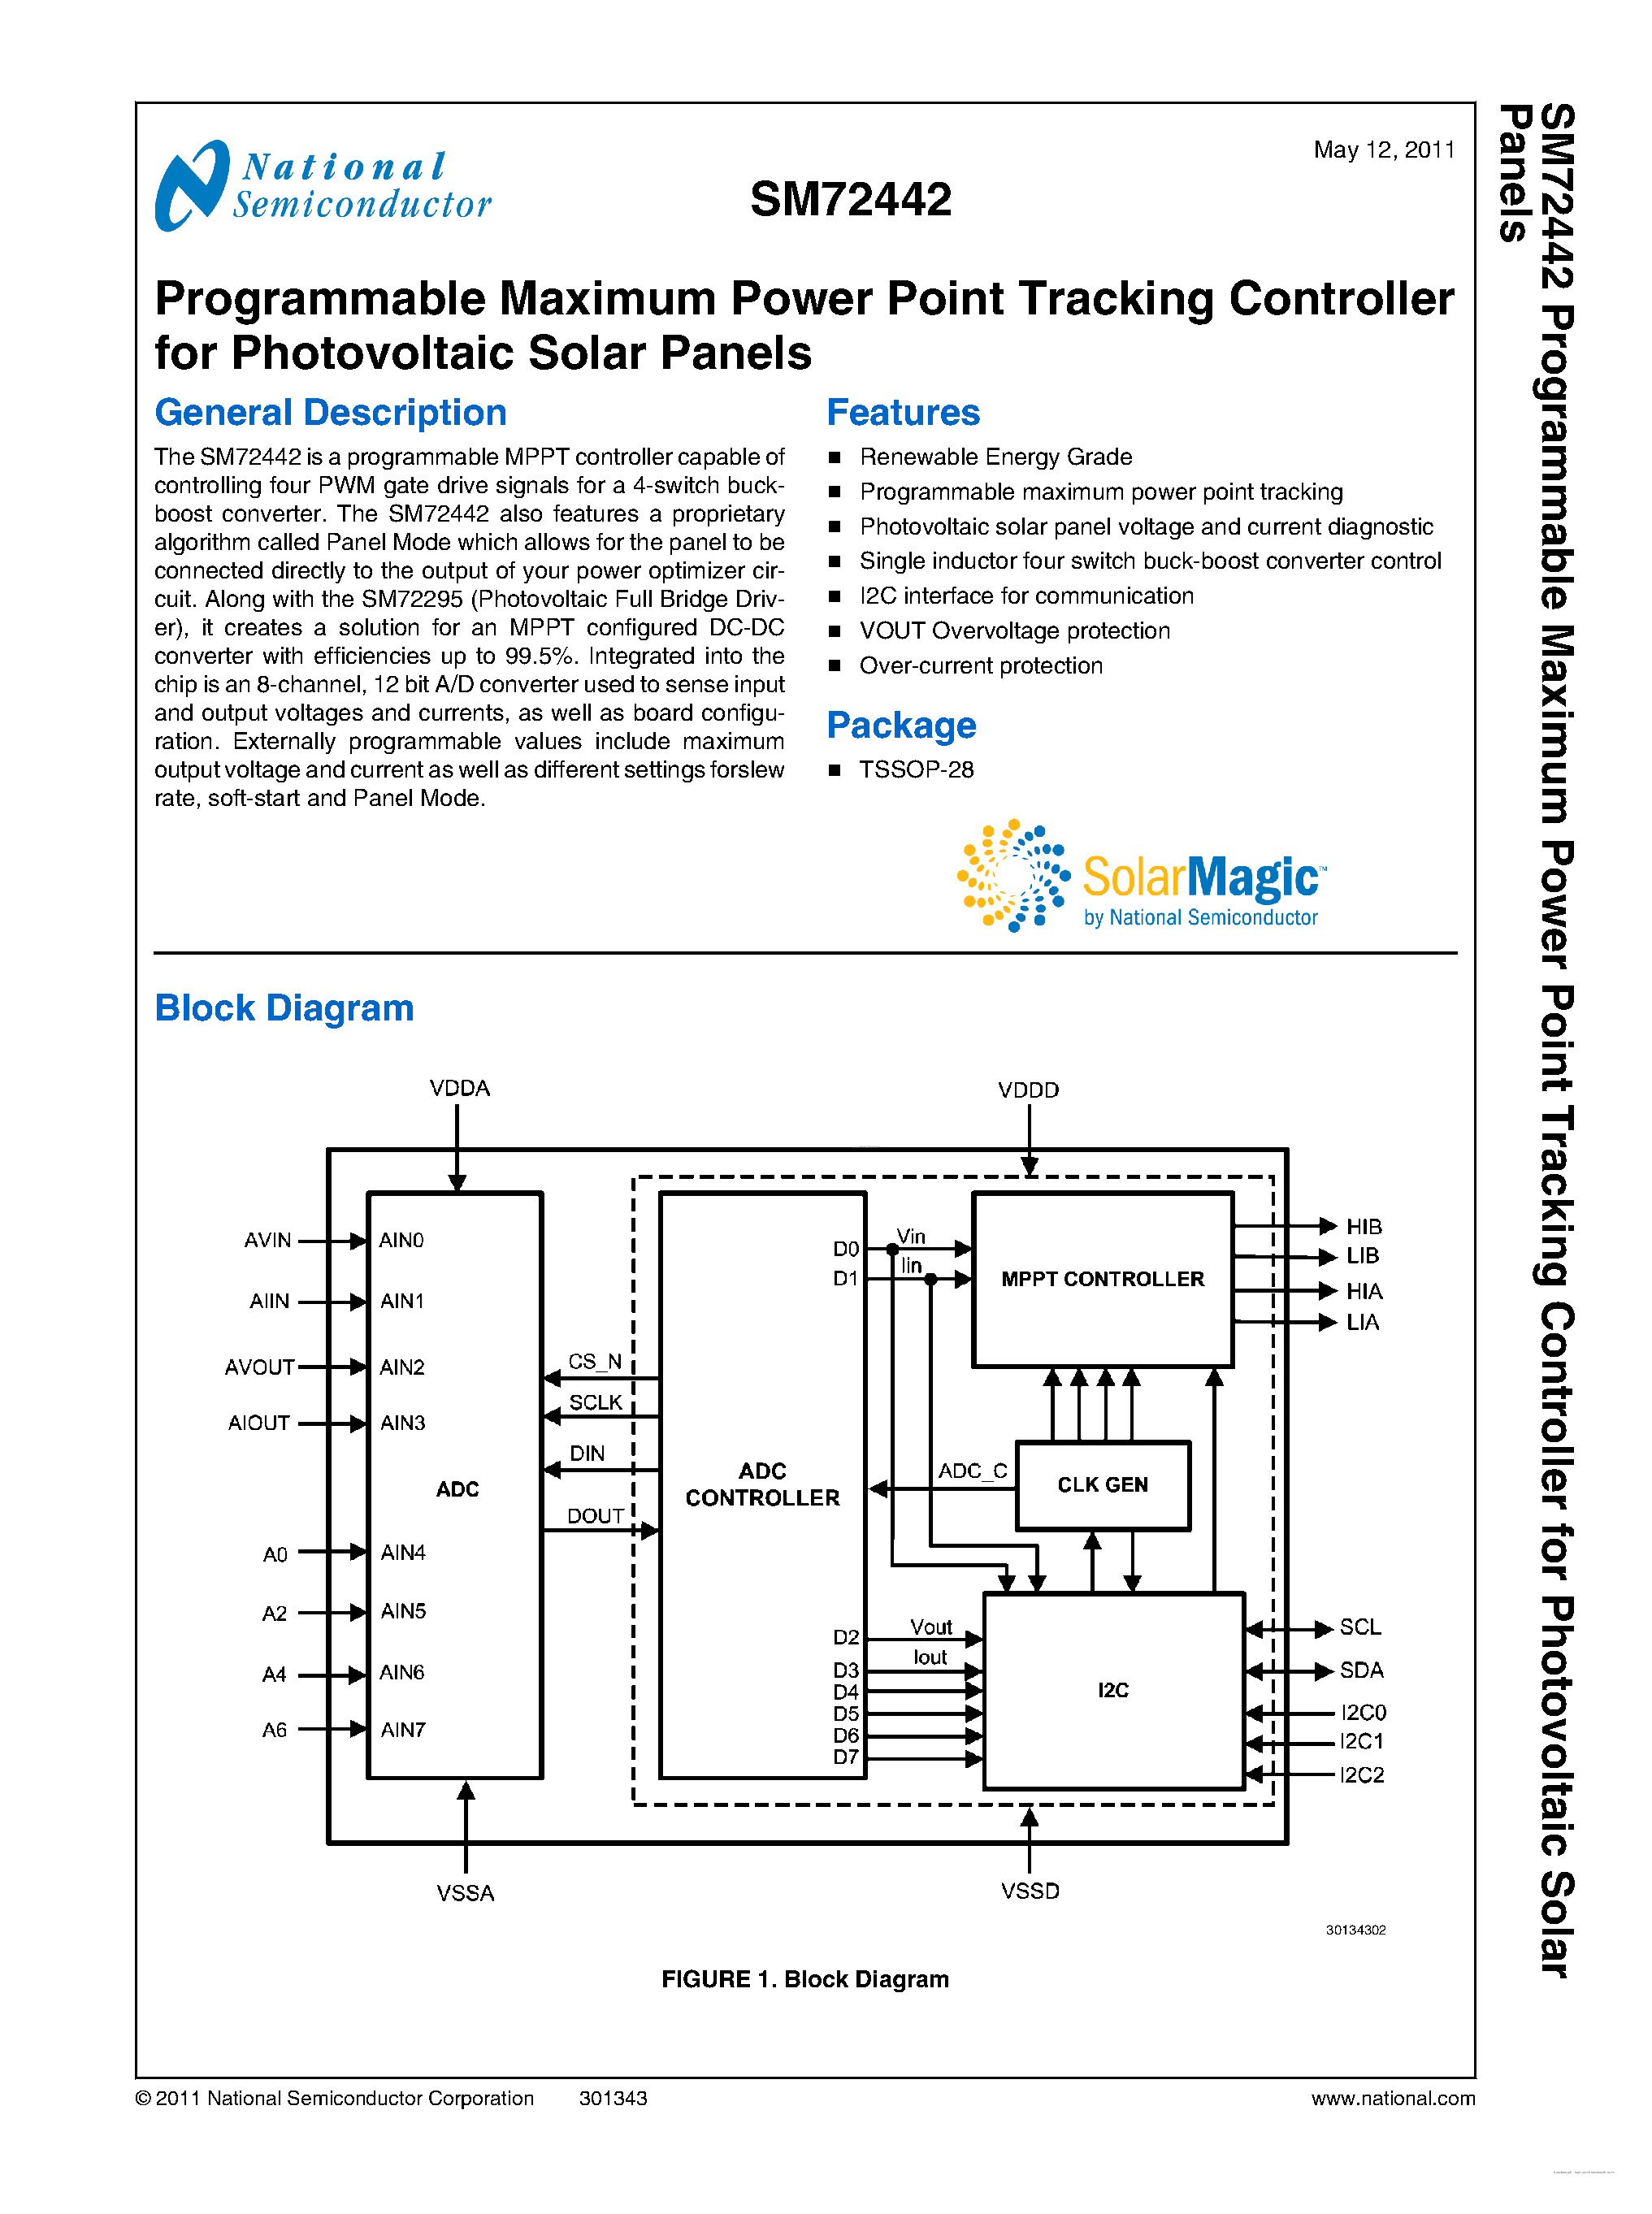 Datasheet SM72442 - Programmable Maximum Power Point Tracking Controller page 1